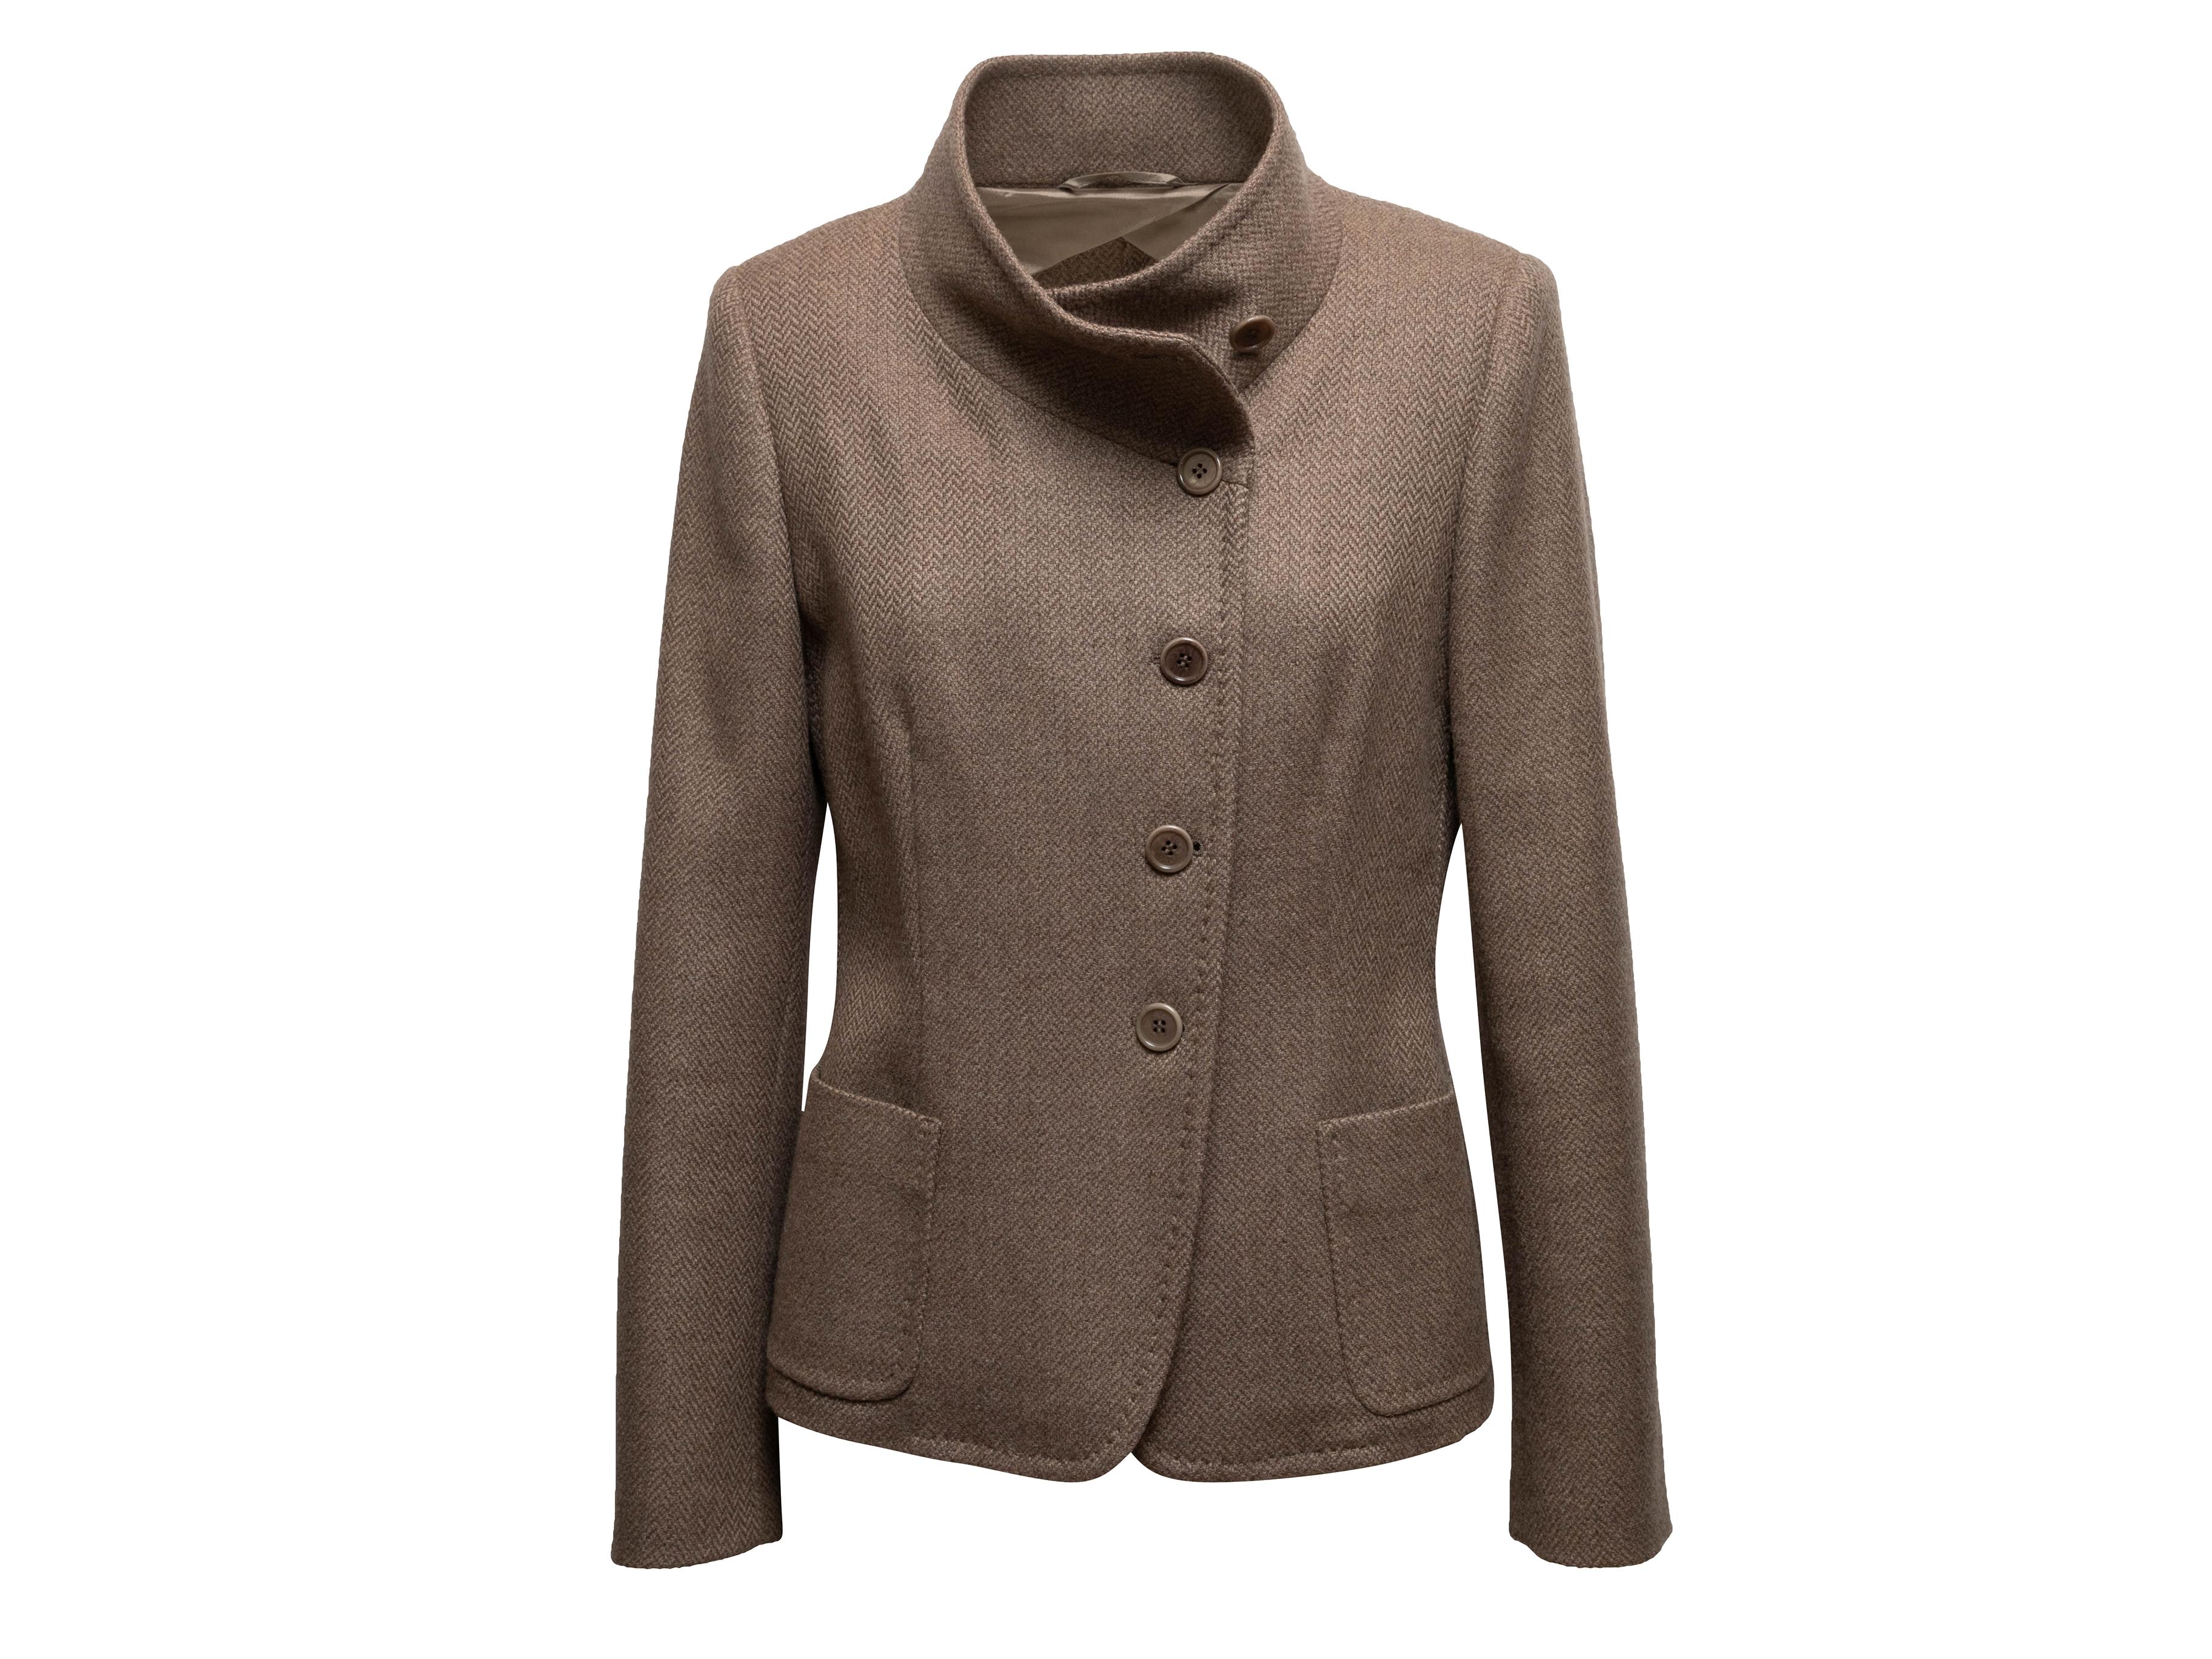 Brown virgin wool and cashmere herringbone jacket by Max Mara. Stand collar. Dual hip pockets. Button closures at center front. 36